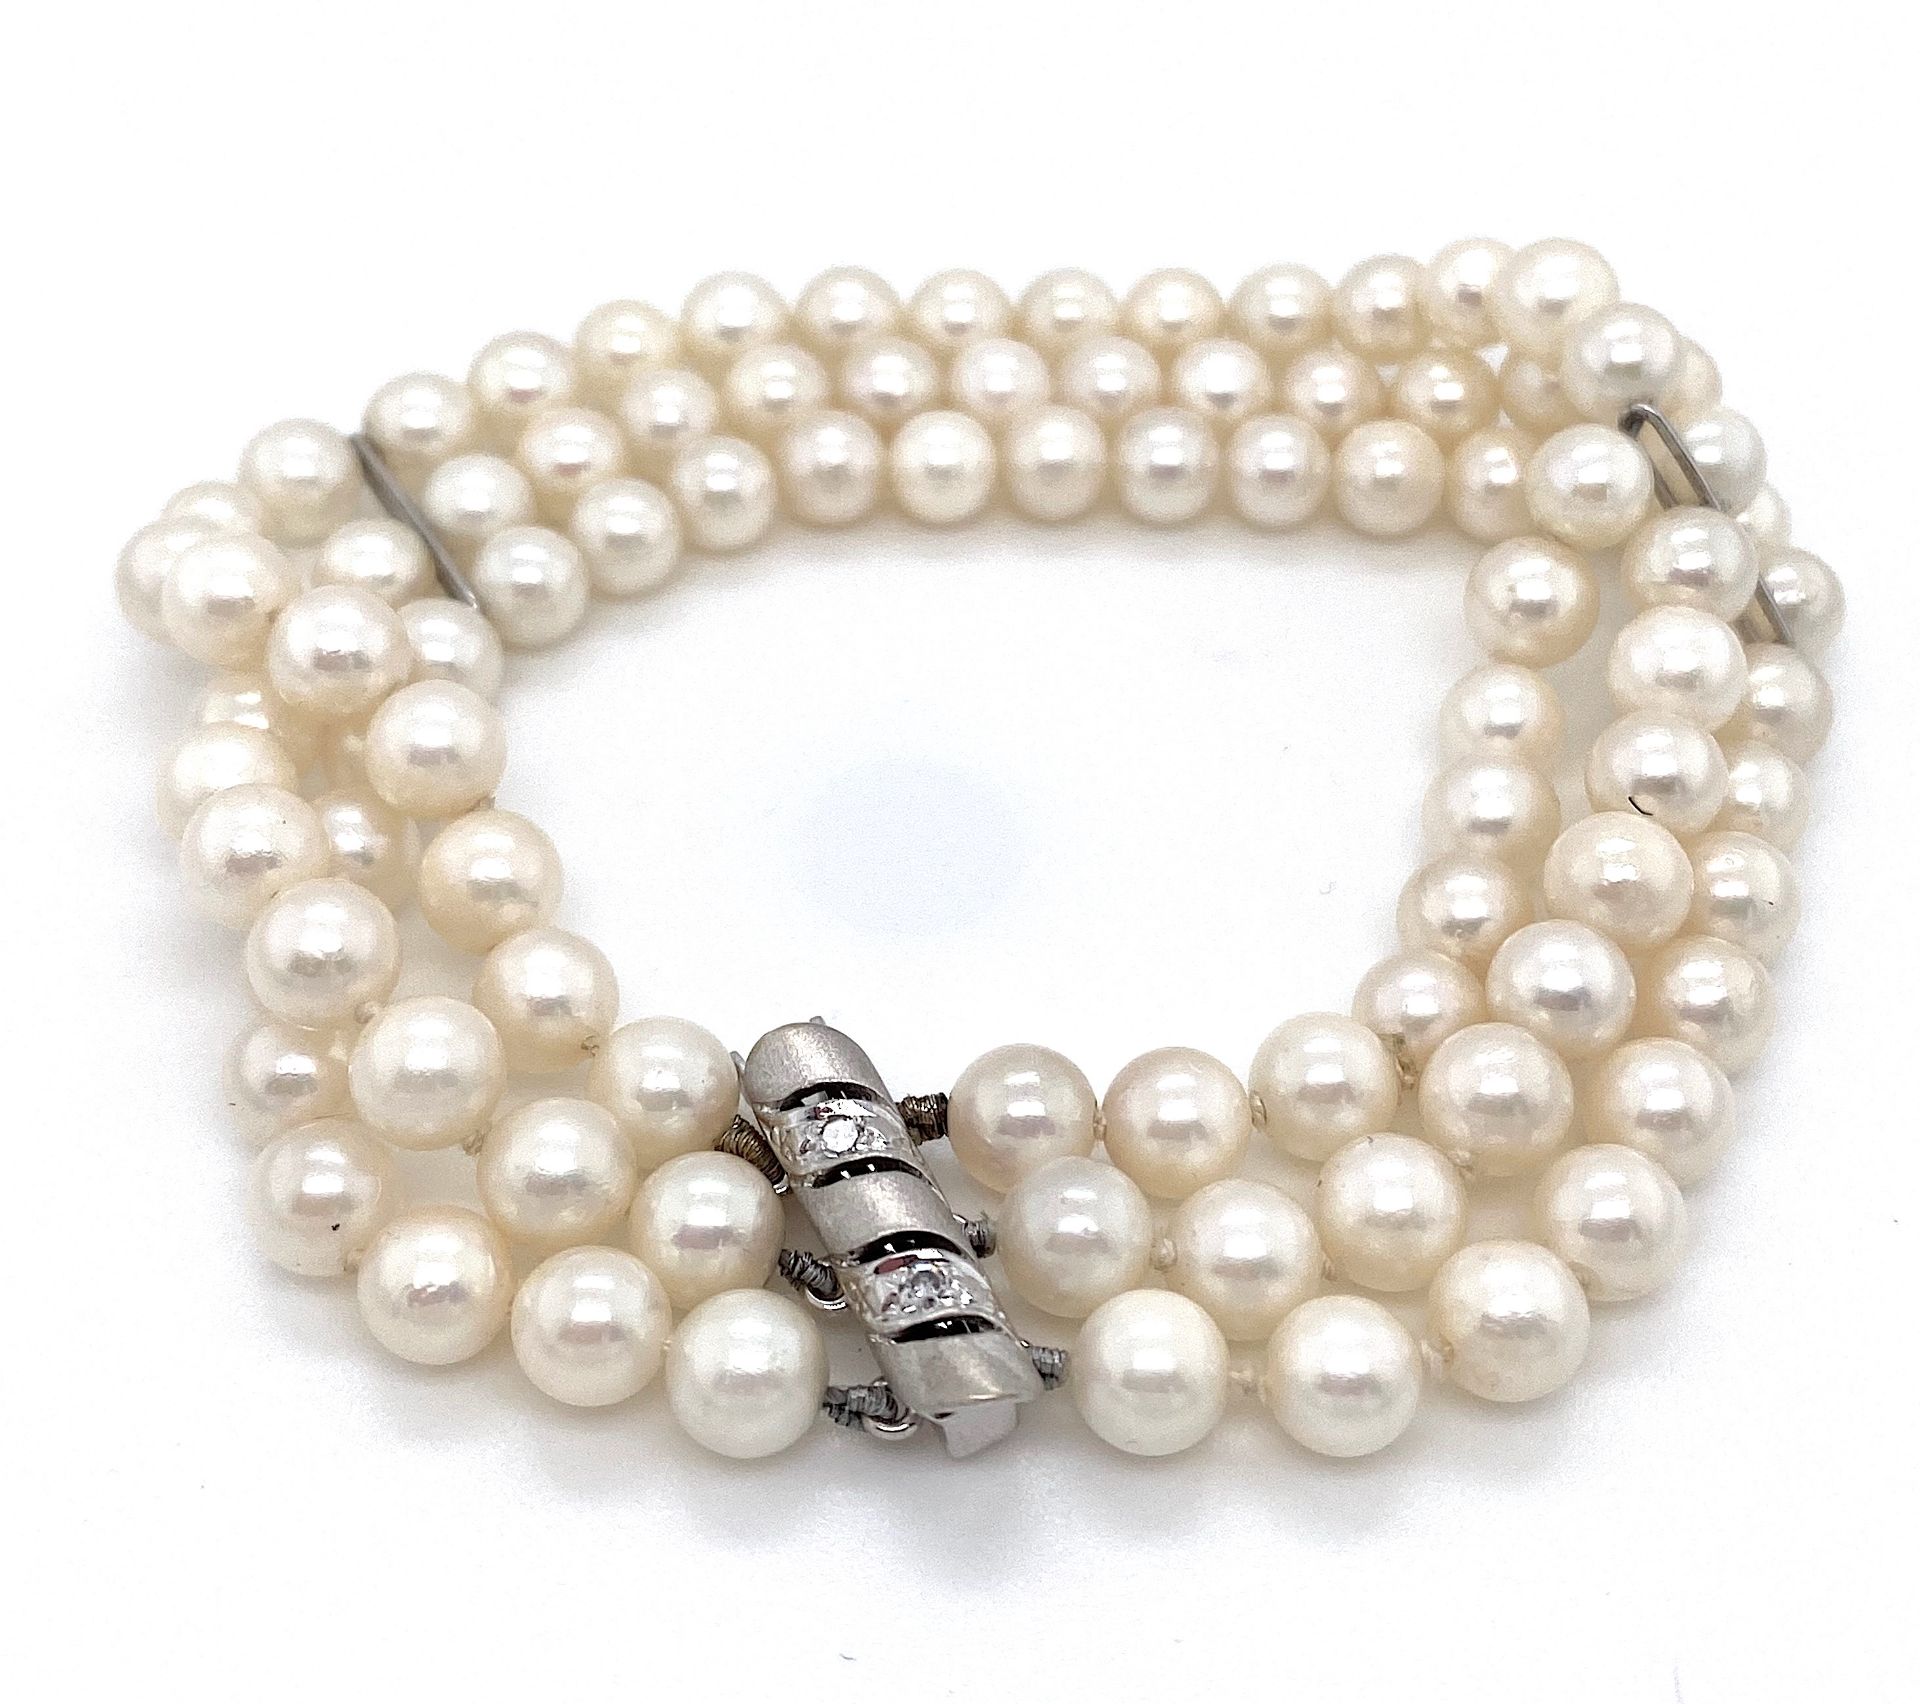 Bracelet with 3 rows of cultured pearls , white gold lock with diamonds